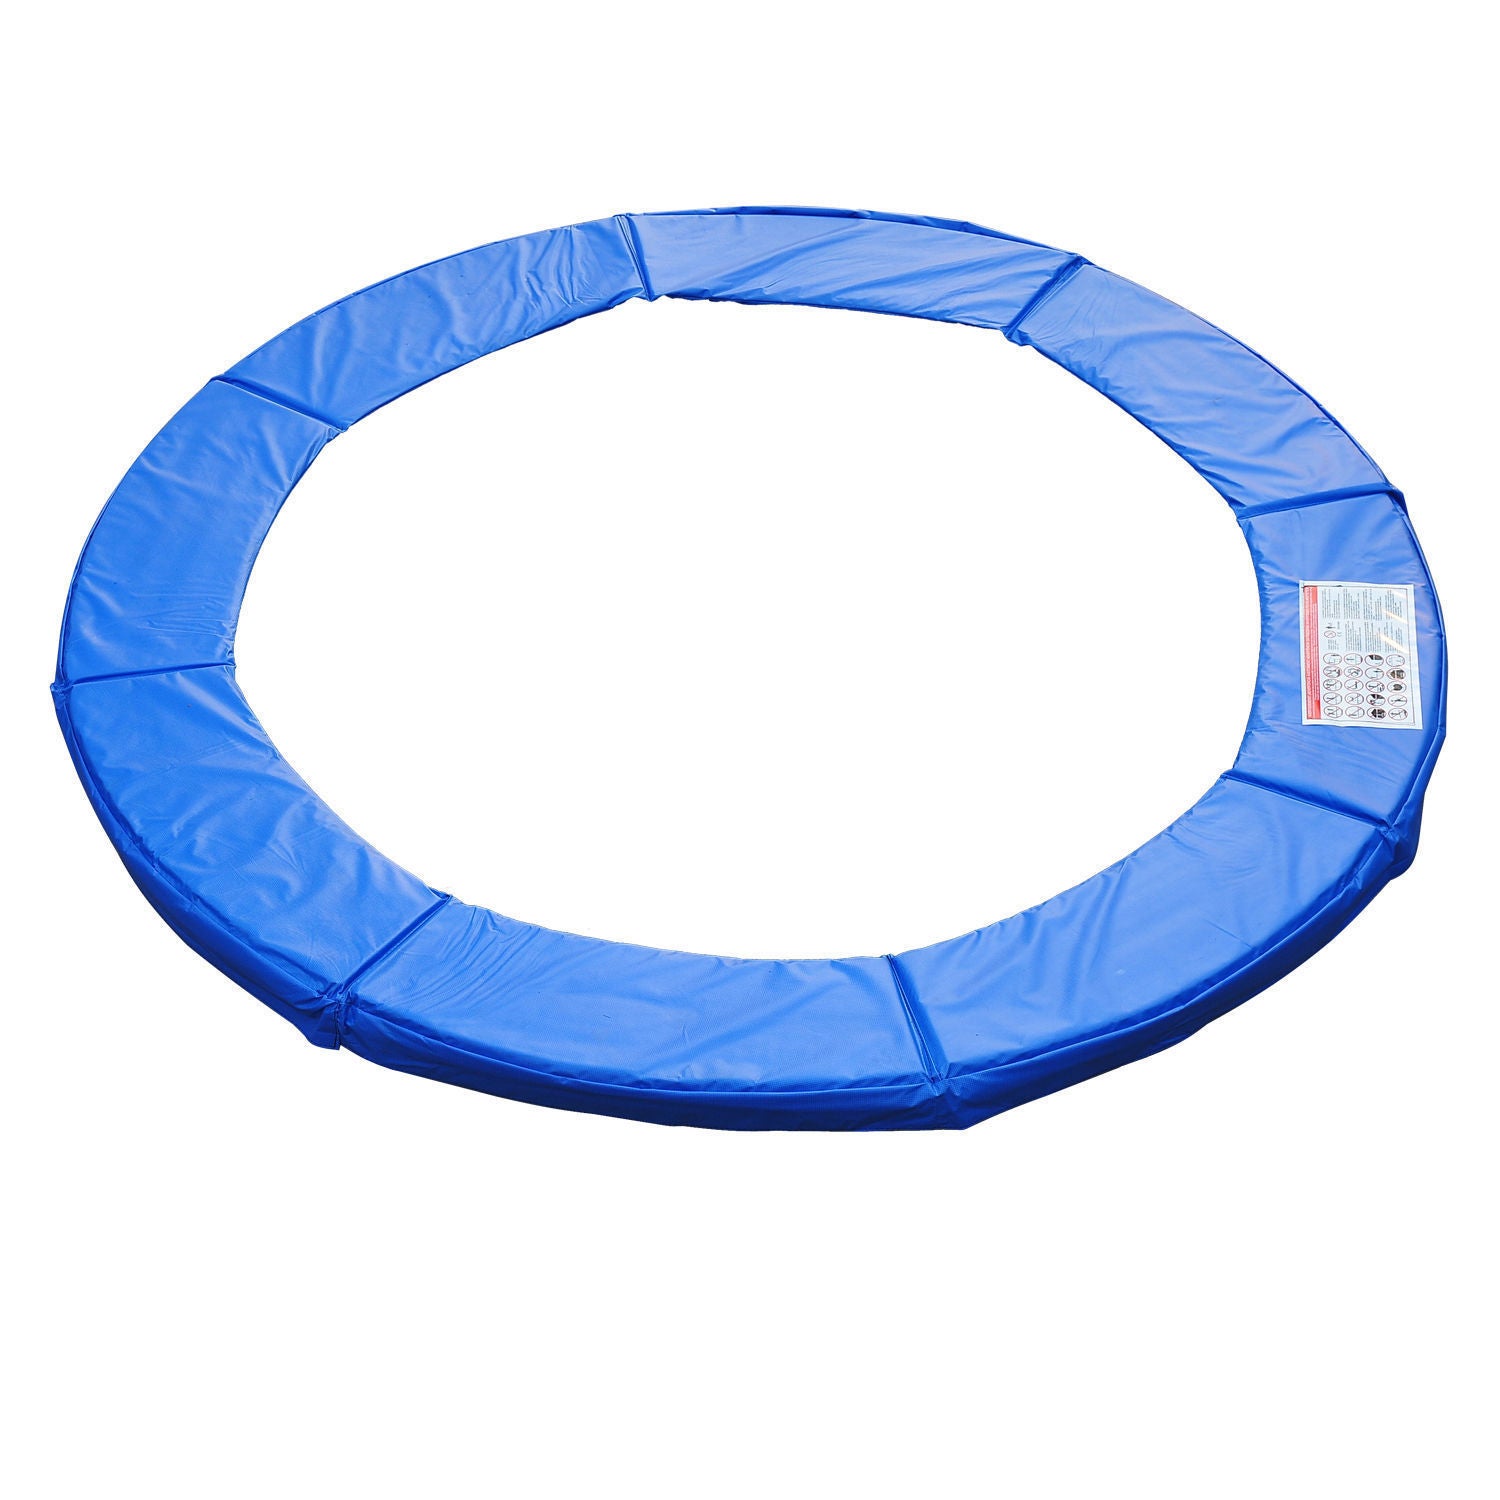 Nancy's Aberdeen Trampoline edge protection for trampolines of Ø305 cm